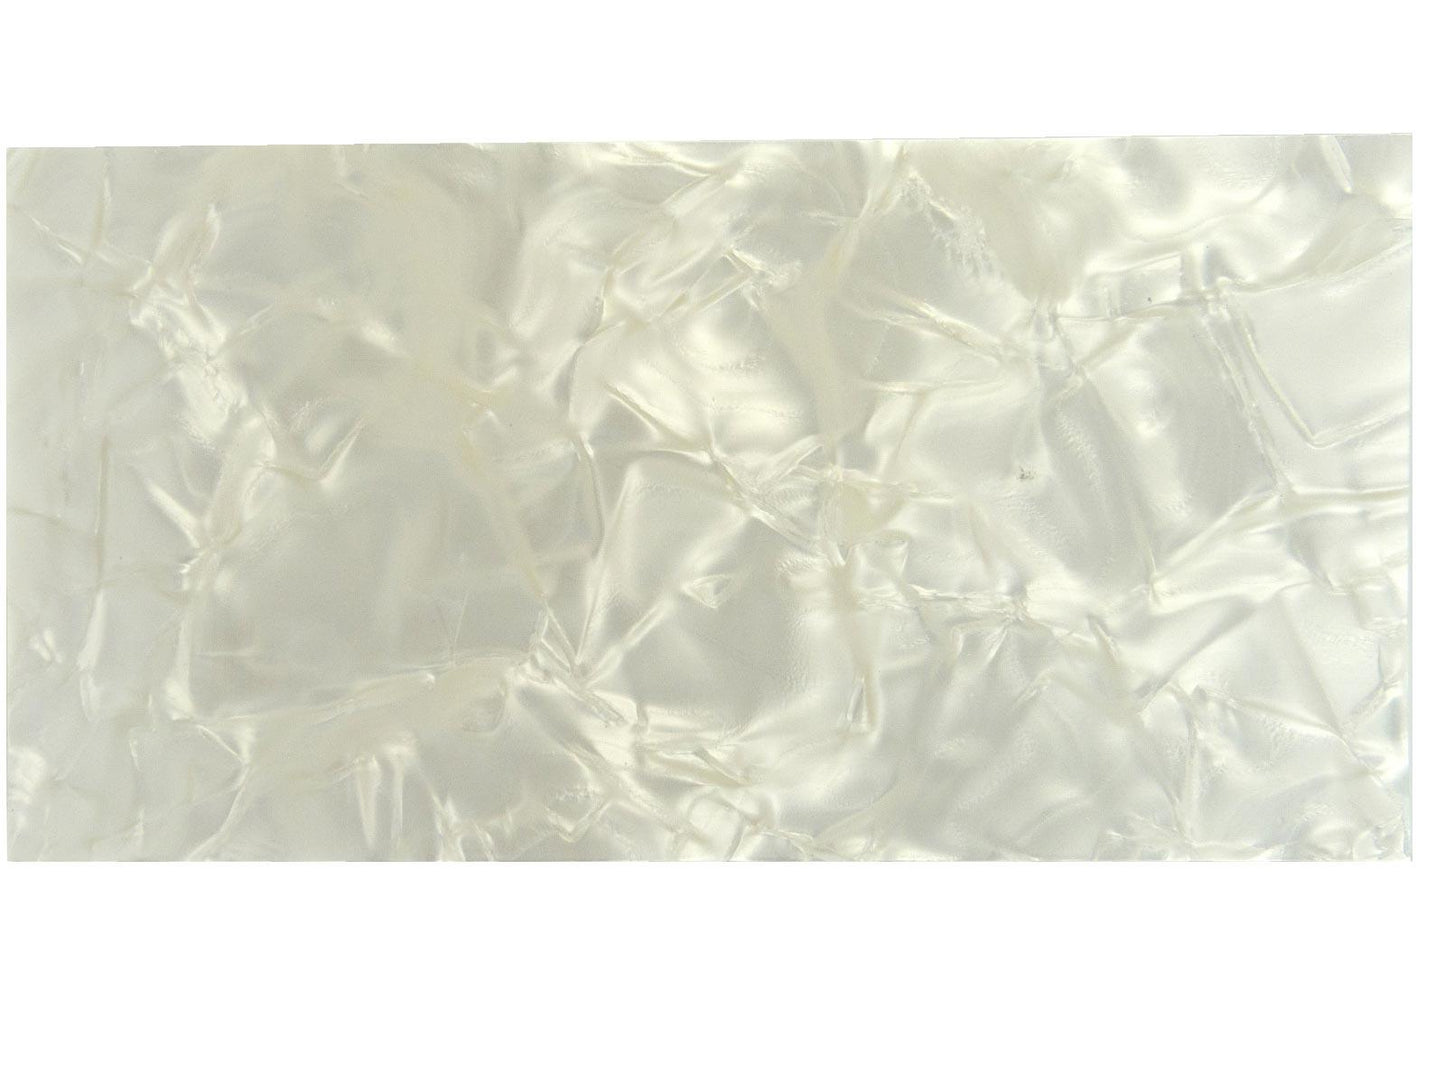 Incudo White Large Pattern Pearloid Celluloid Sheet - 200x100x2mm (7.9x3.94x0.08")